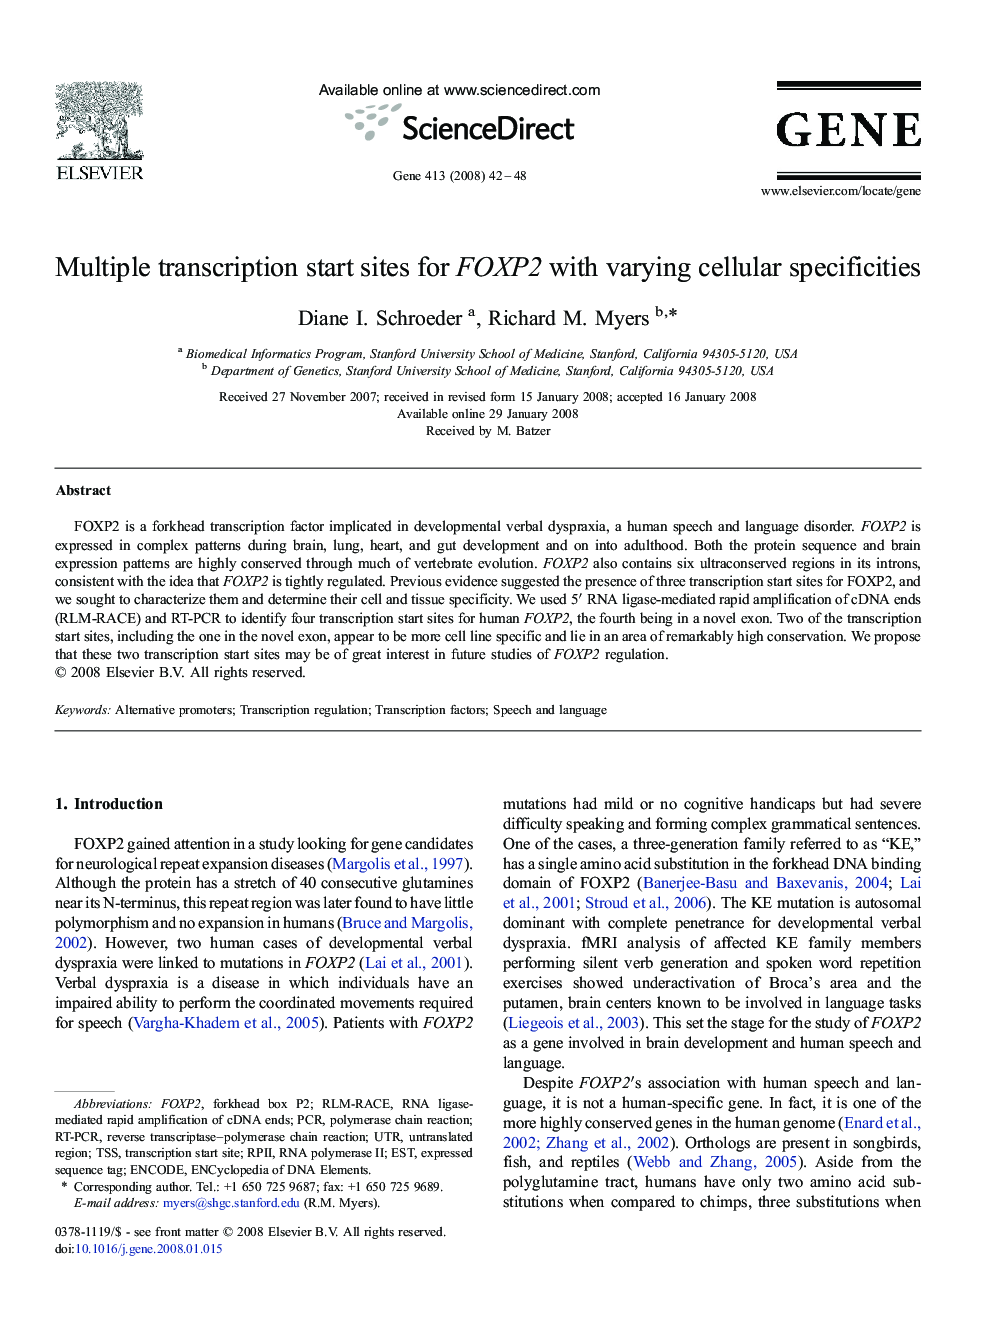 Multiple transcription start sites for FOXP2 with varying cellular specificities